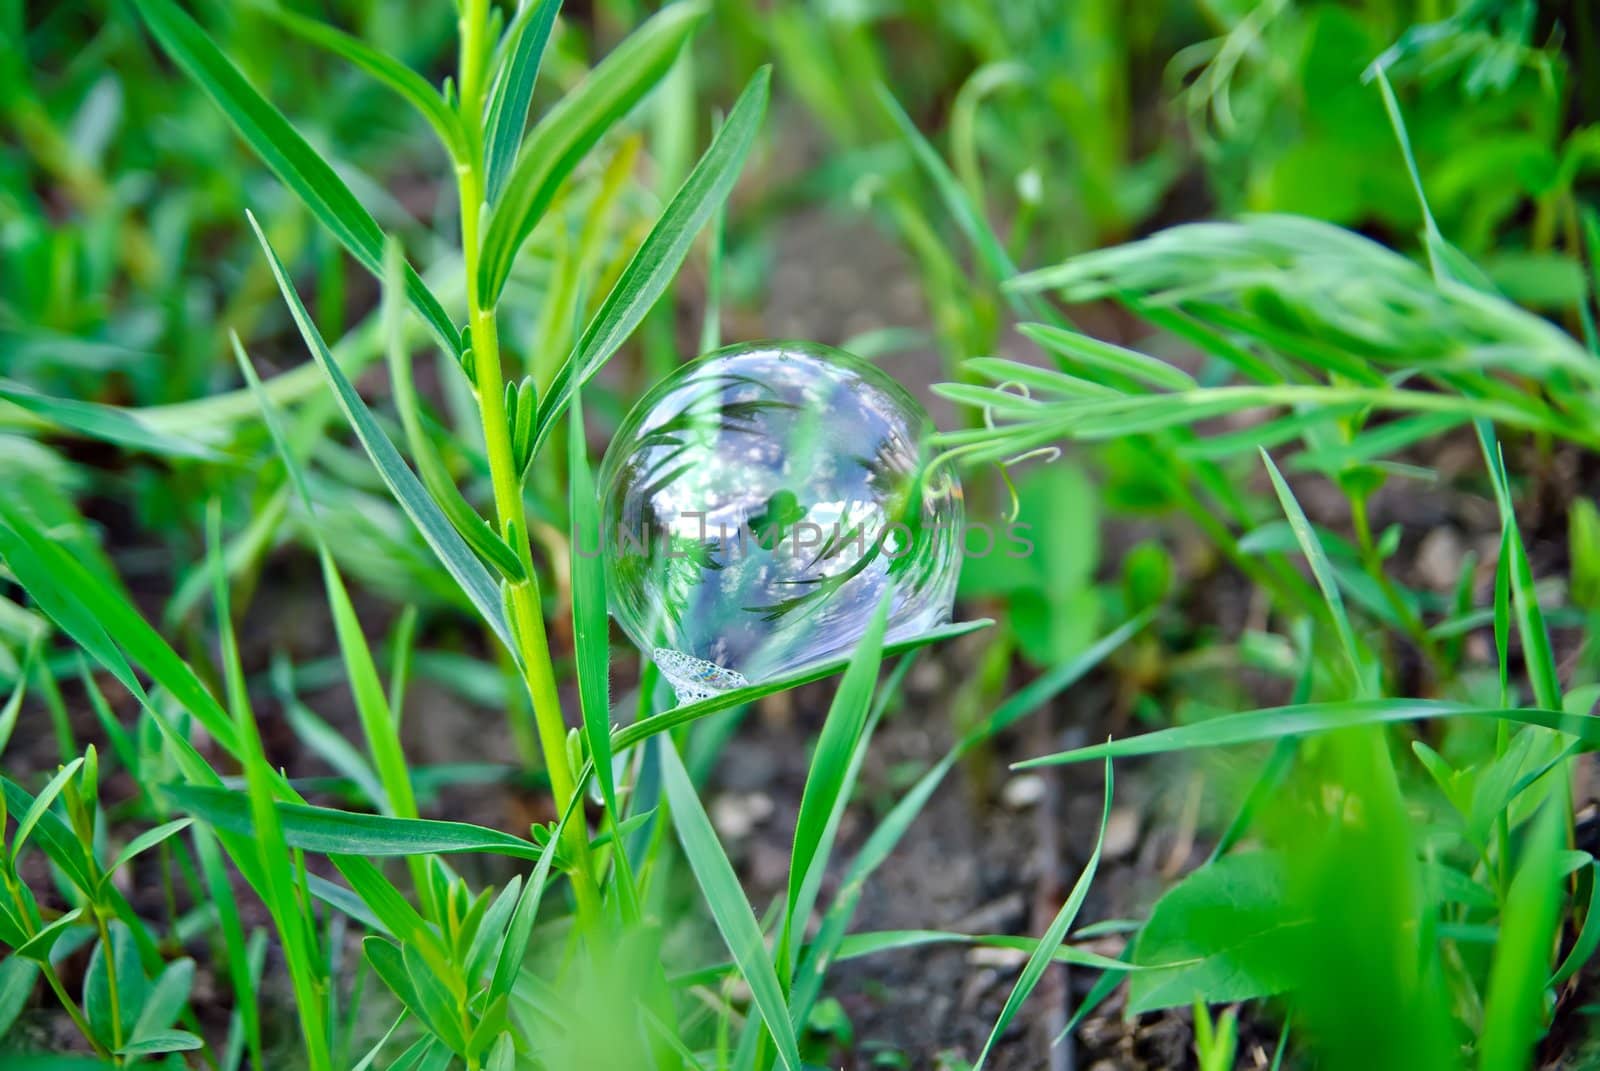 Bubble in the green grass